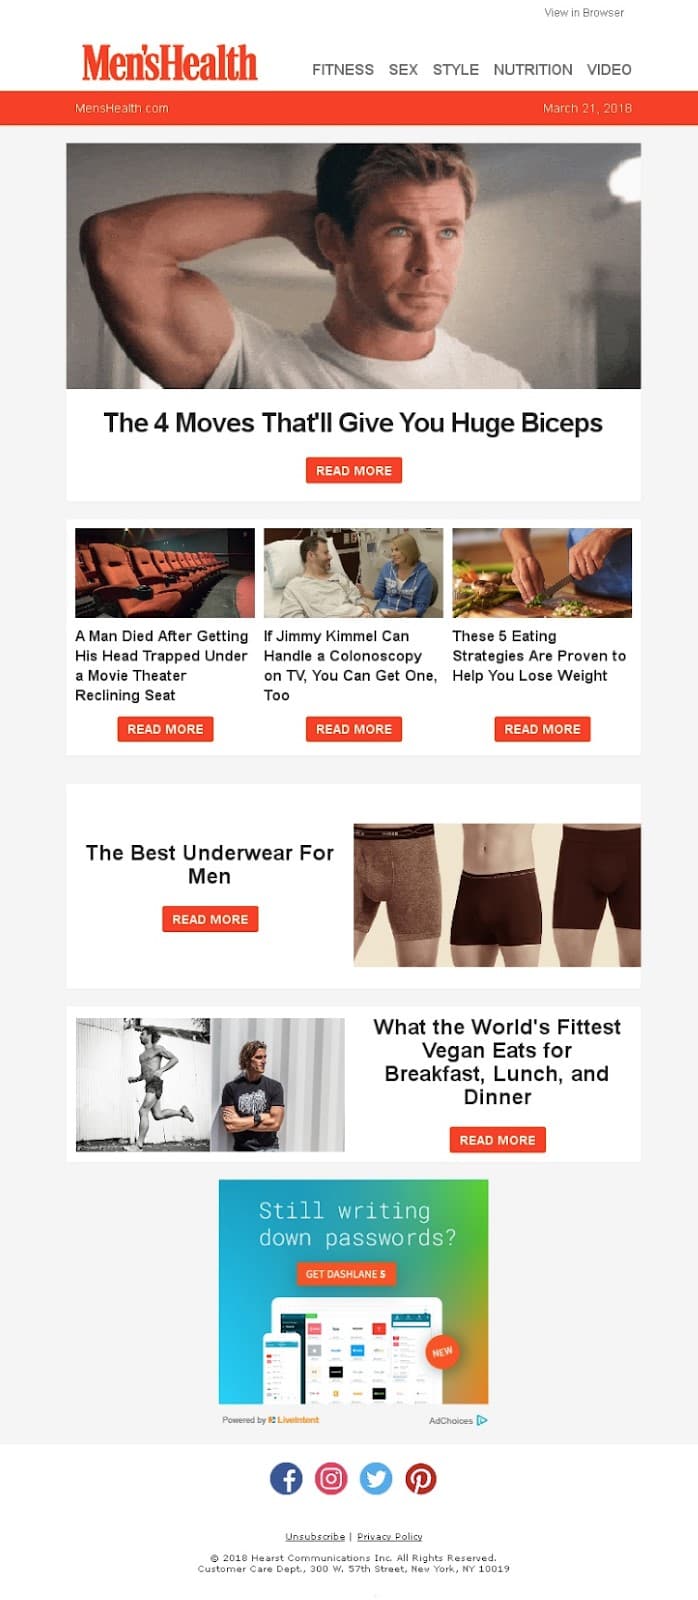 Email newsletter by Men's Health